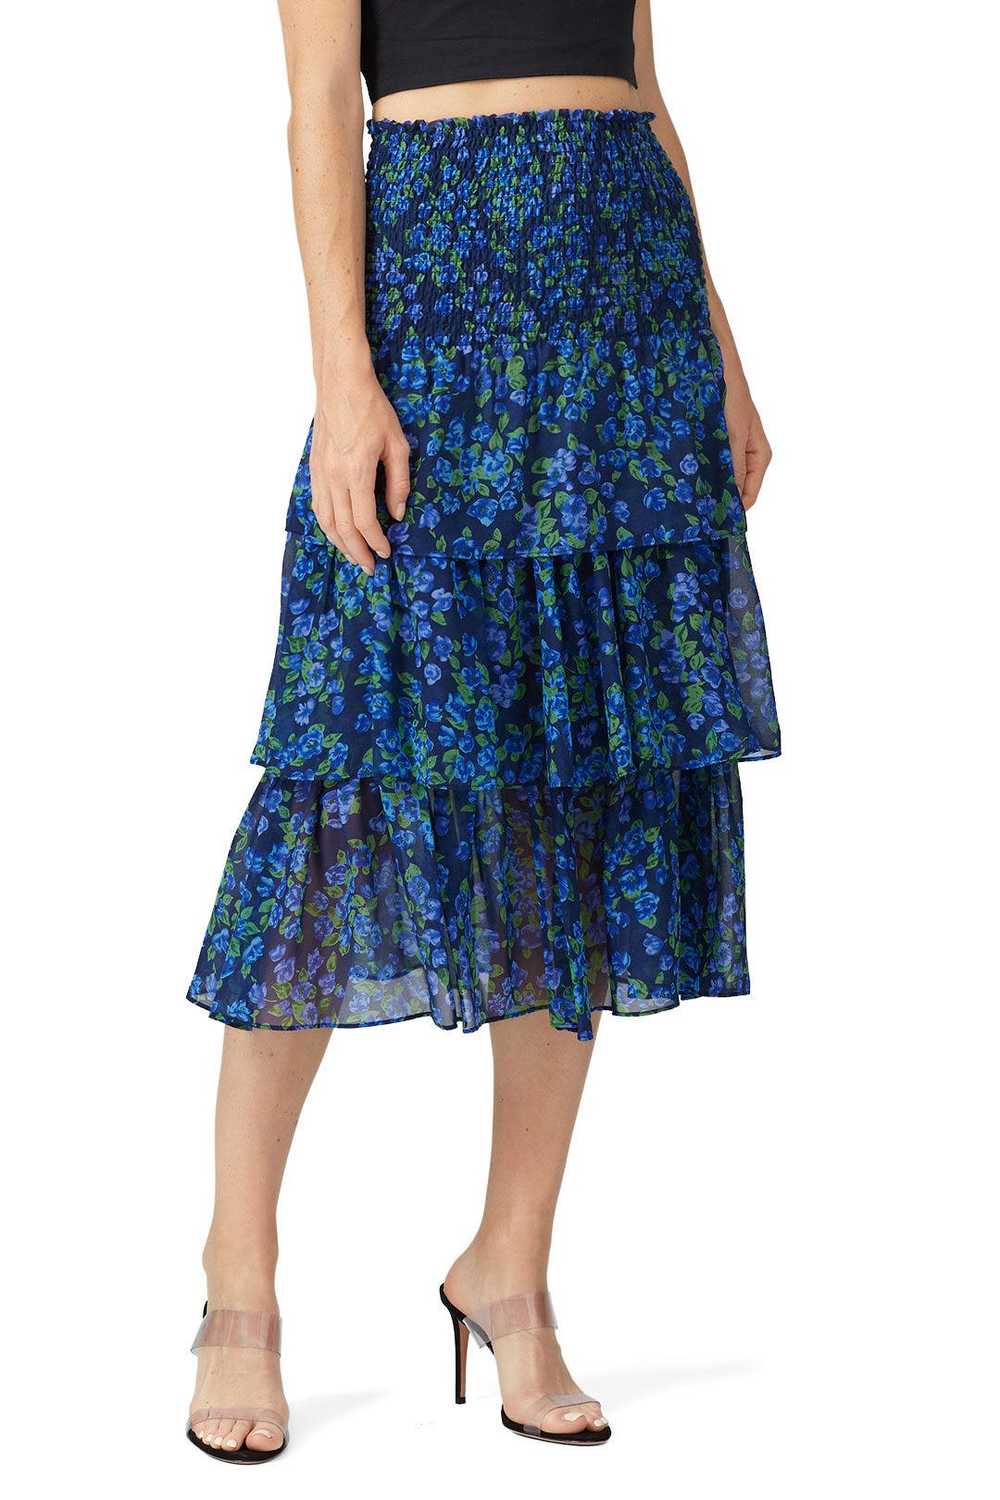 The Kooples Floral Tiered Skirt - image 2